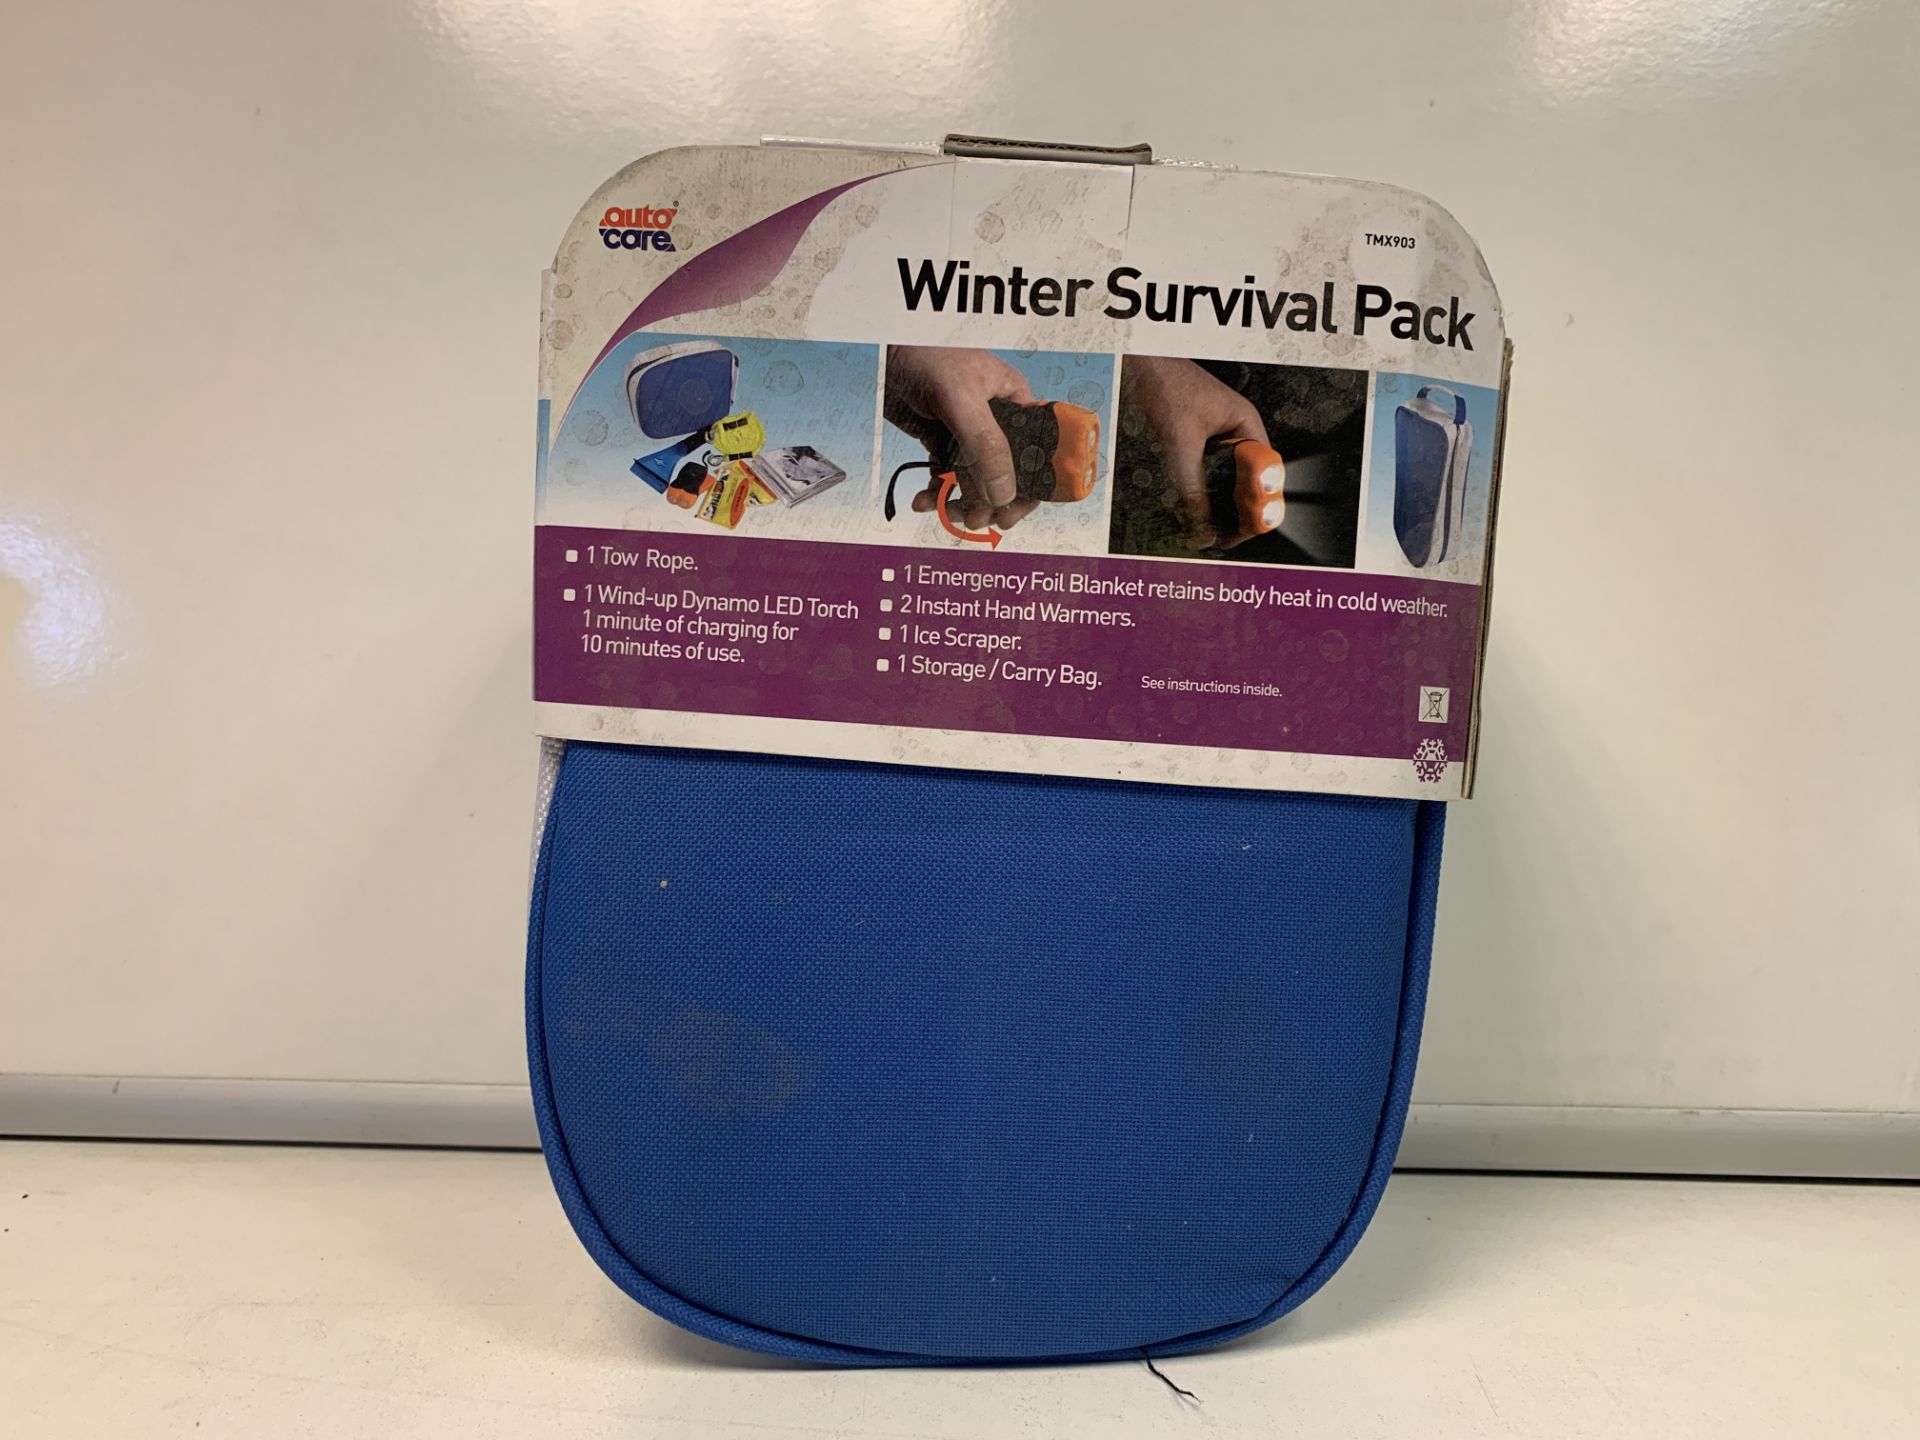 18 X NEW PACKAGED SETS OF AUTOCARE WINTER SURVIVAL PACKS. EACH CONTAINS 1 TOW ROPE, 1 LED WIND UP